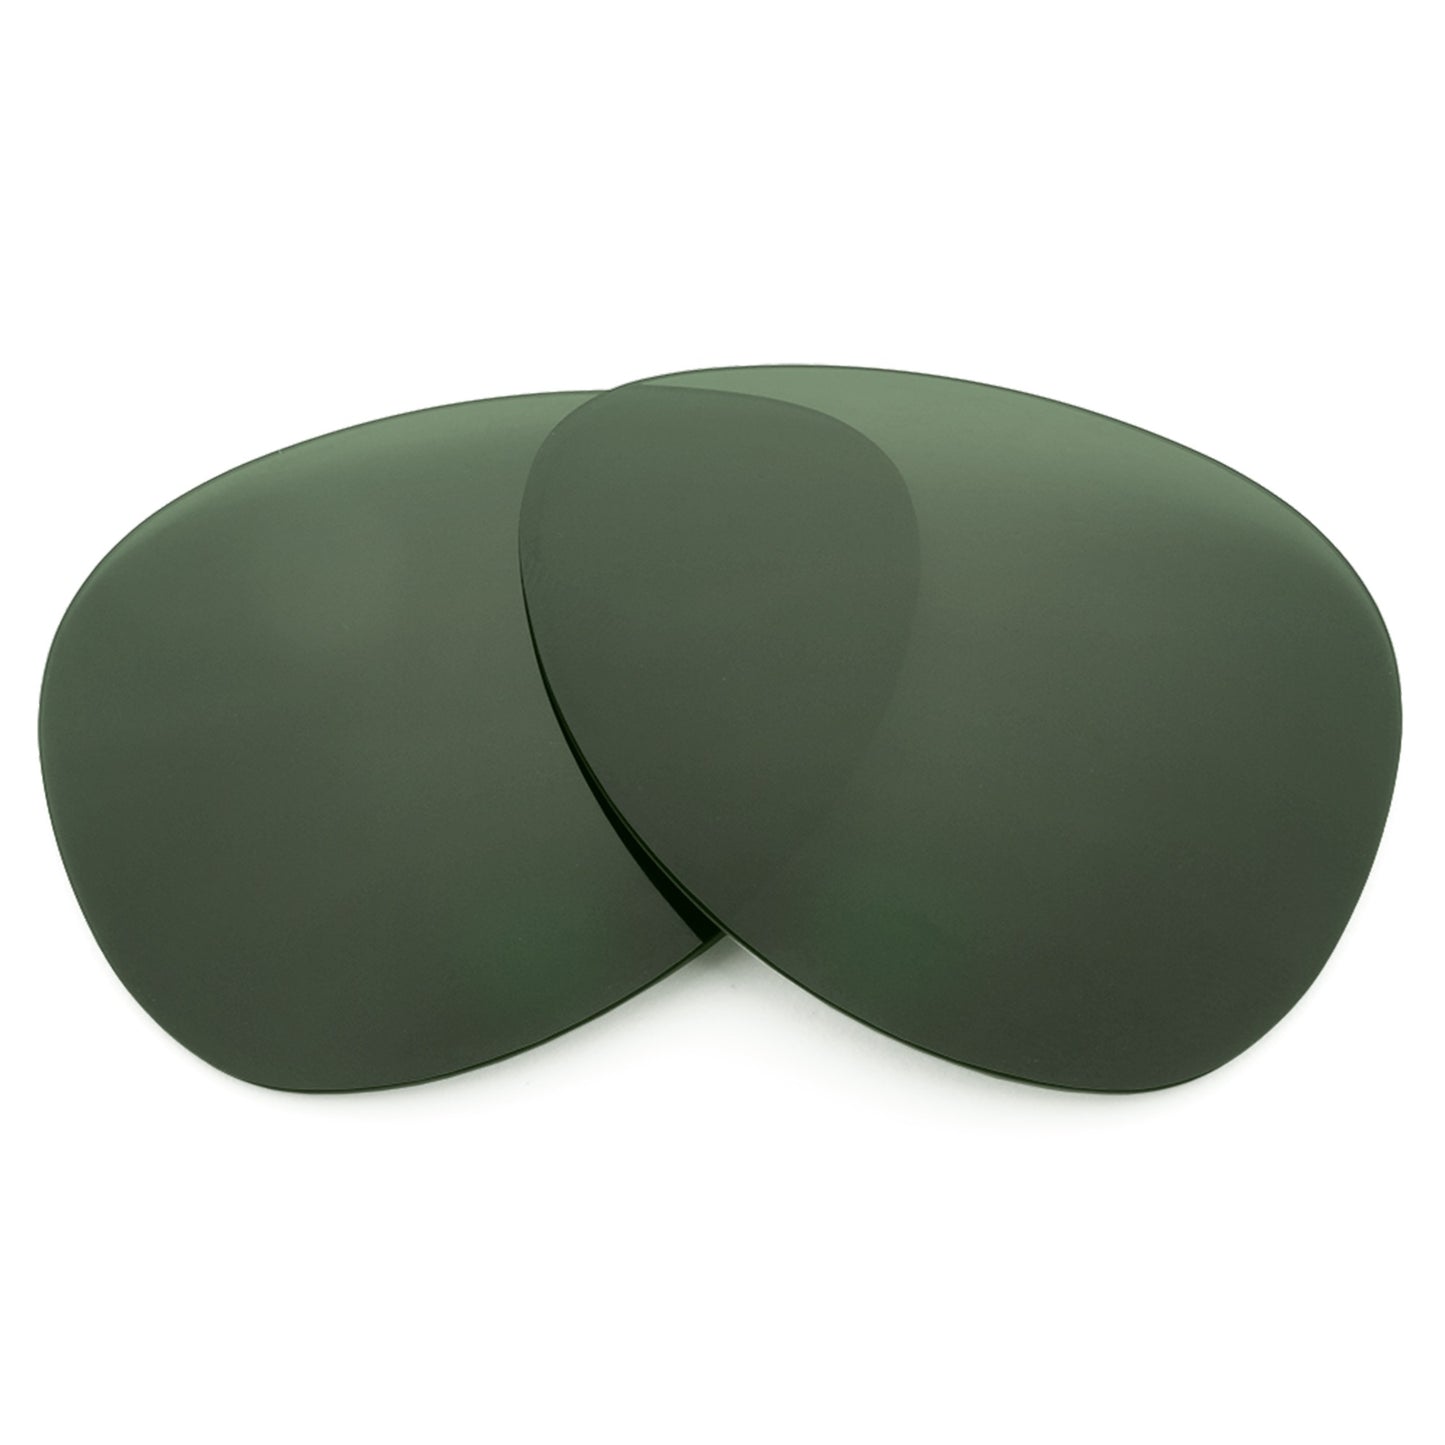 Revant replacement lenses for Ray-Ban Aviator Liteforce RB4180 58mm Non-Polarized Gray Green